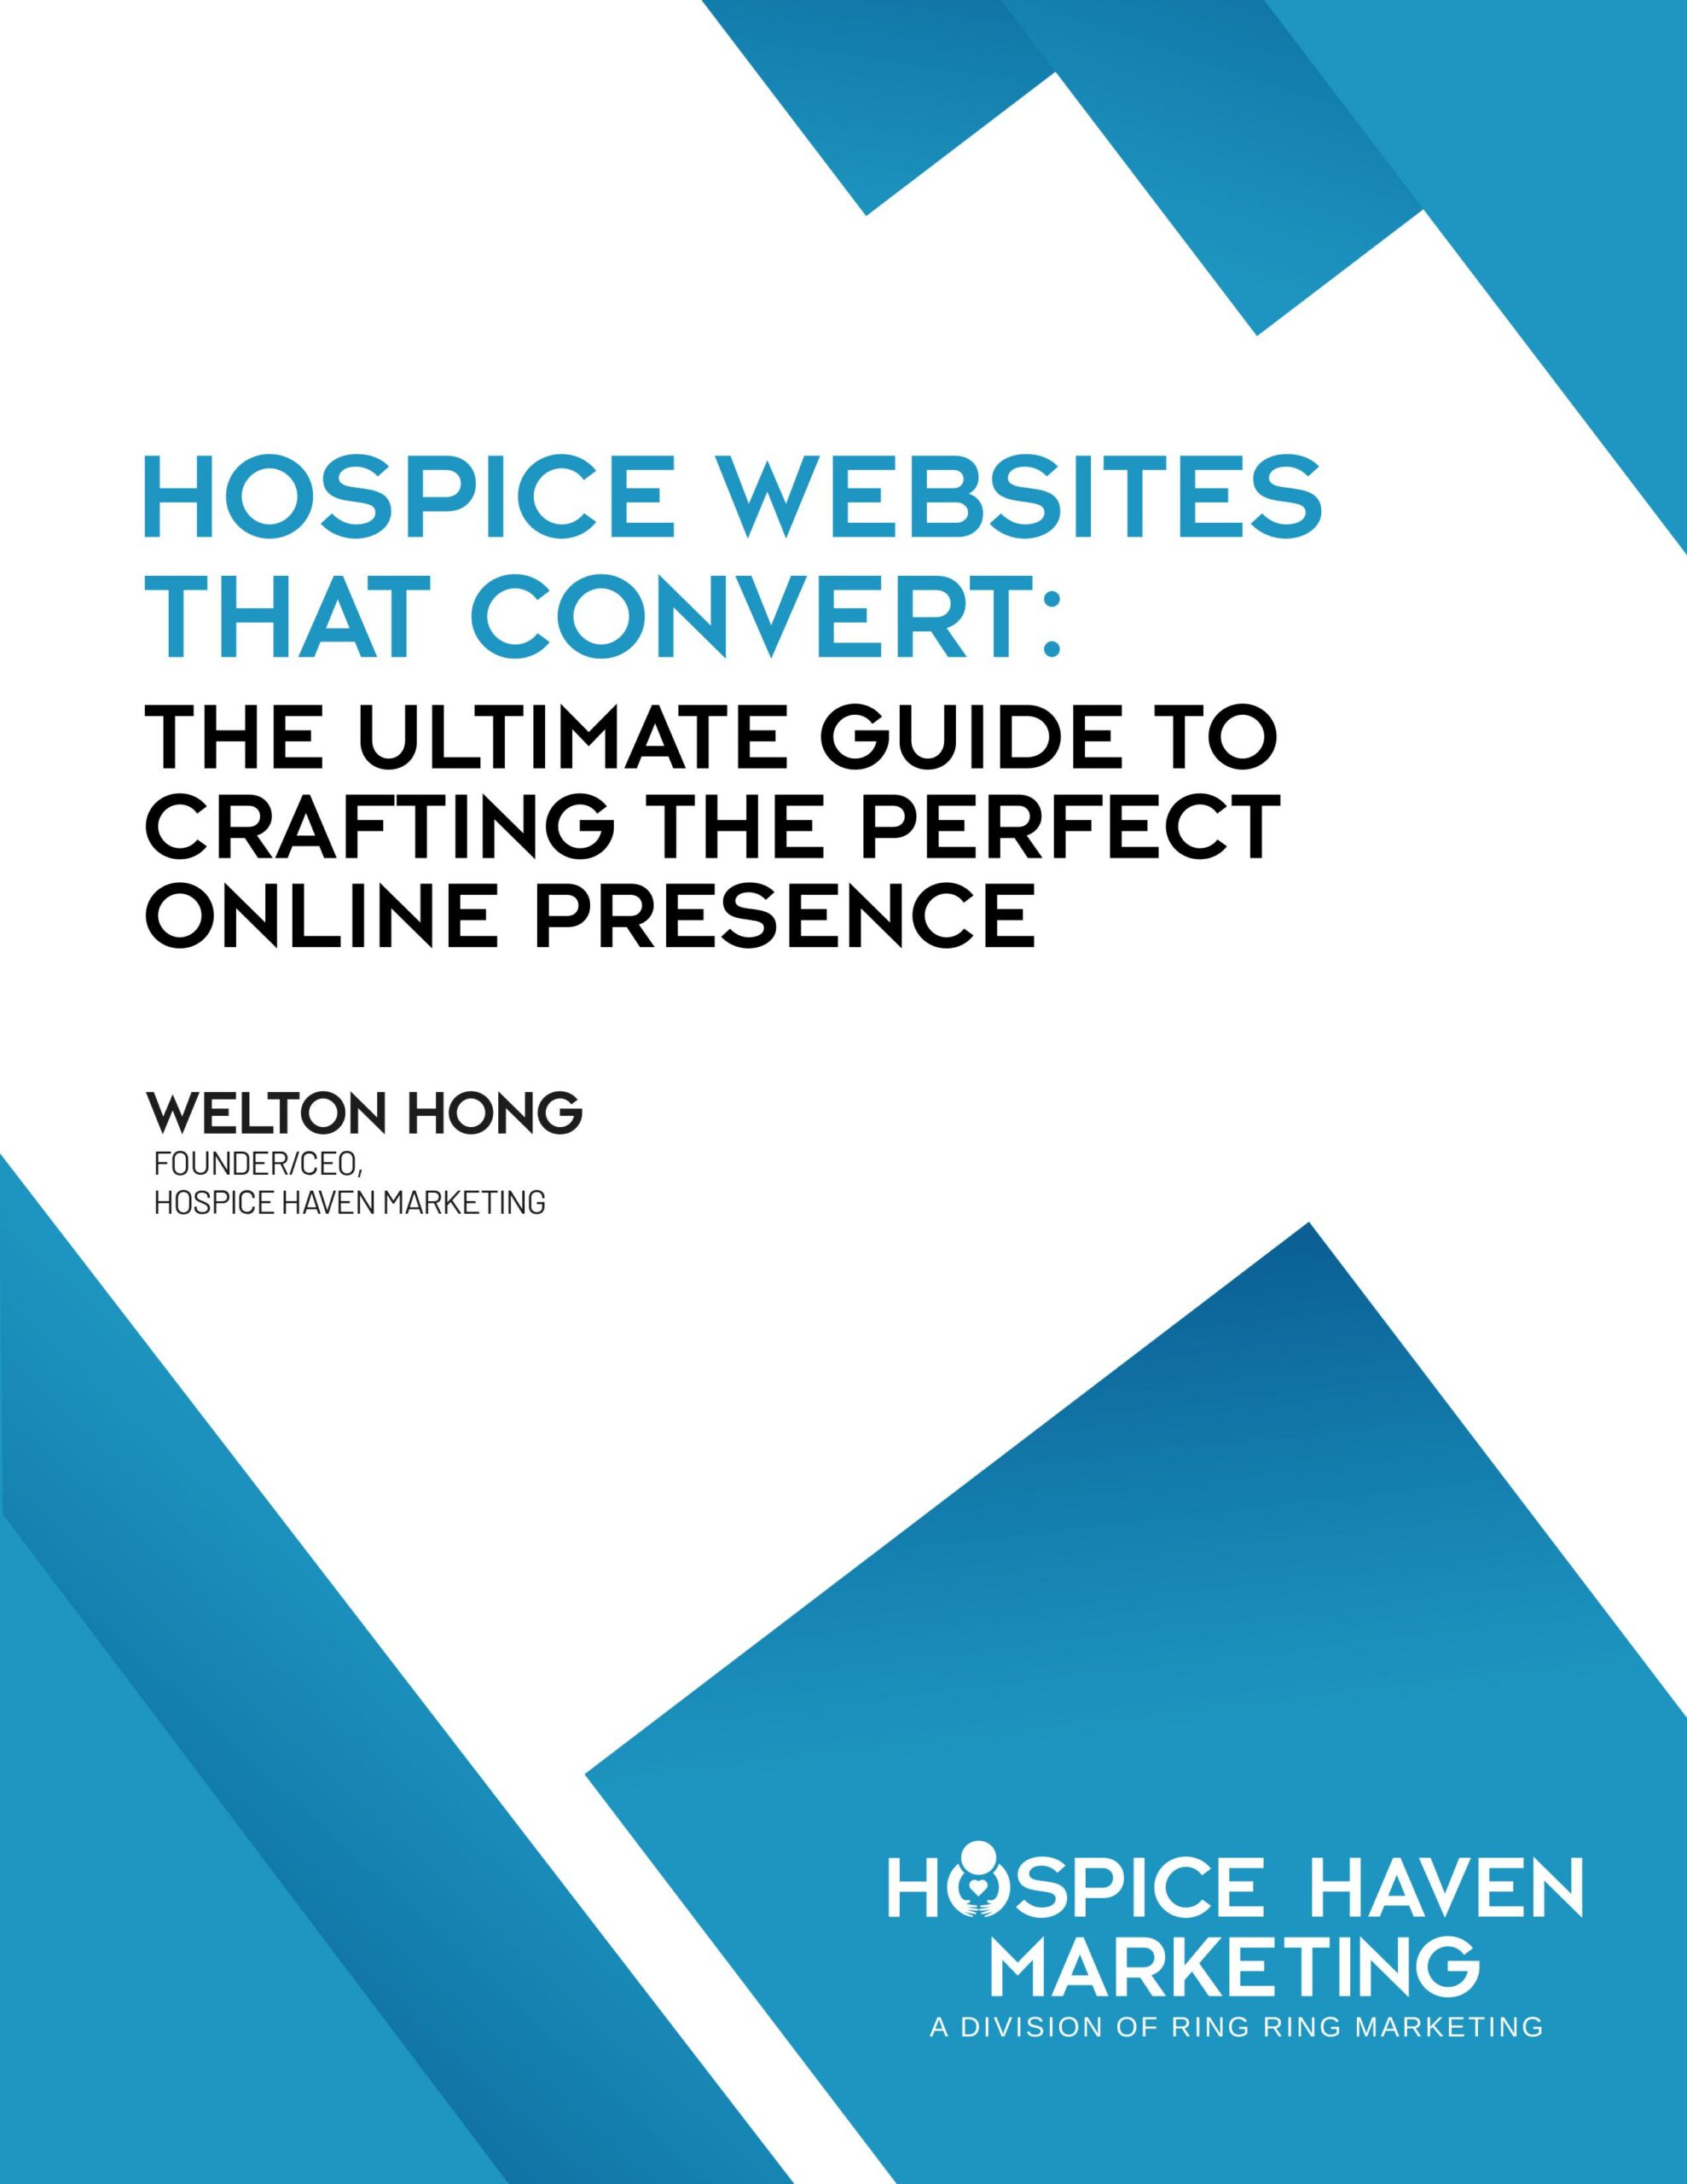 ATTENTION Hospice Care Providers: Discover the Secrets to Crafting the Perfect Online Presence That Drives Referrals, Engages Volunteers, and Boosts Admissions!